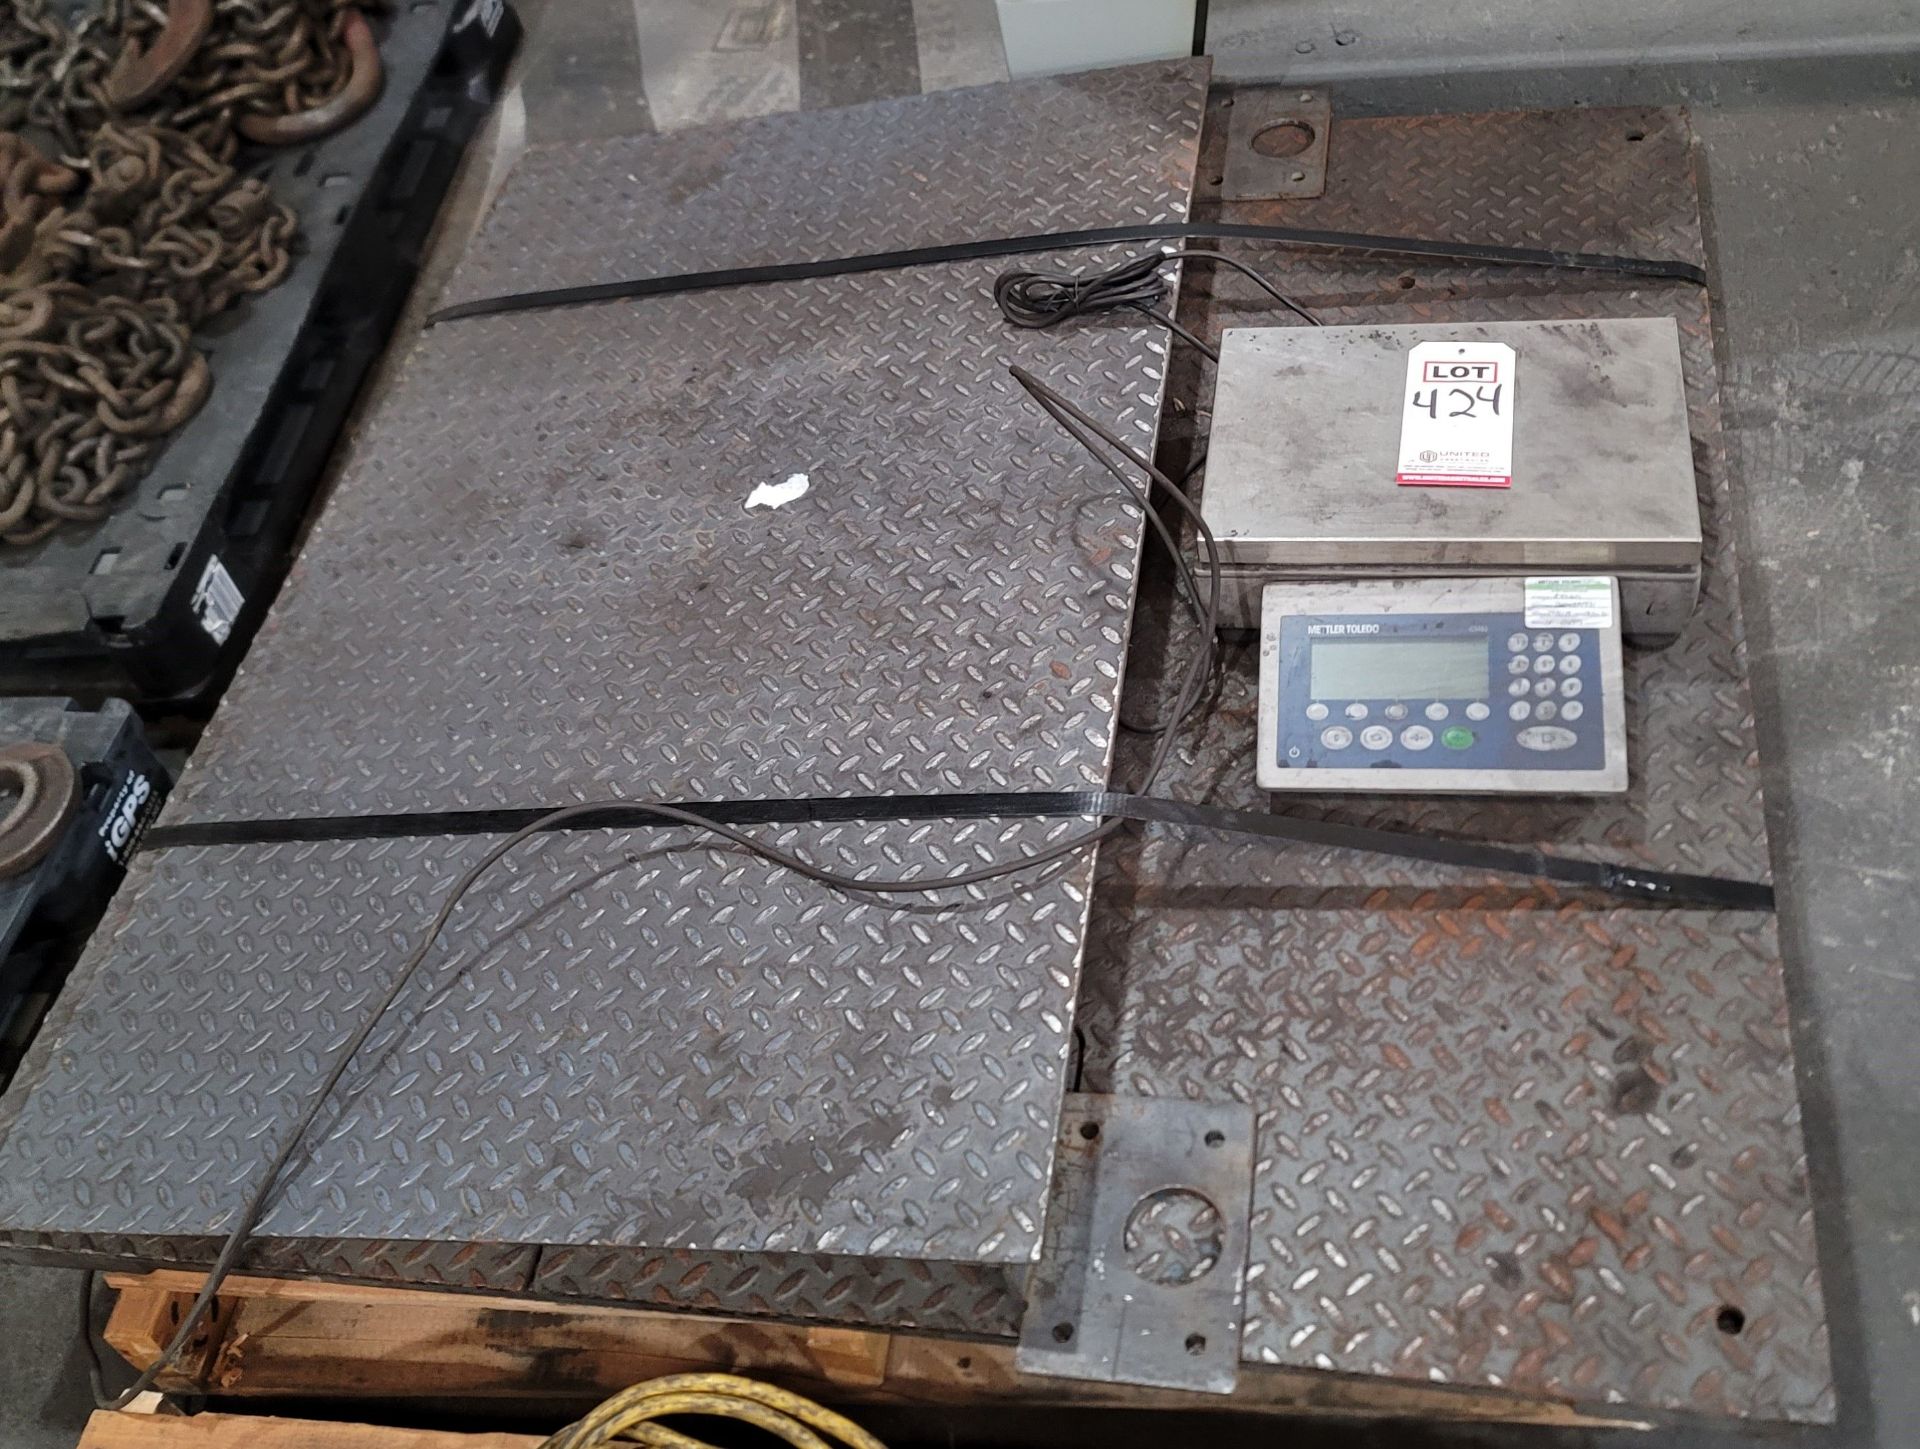 THURMAN 4' X 4' PALLET SCALE, W/ RAMP AND METTLER TOLEDO ICS465 COMPACT SCALE WITH A WEIGHING